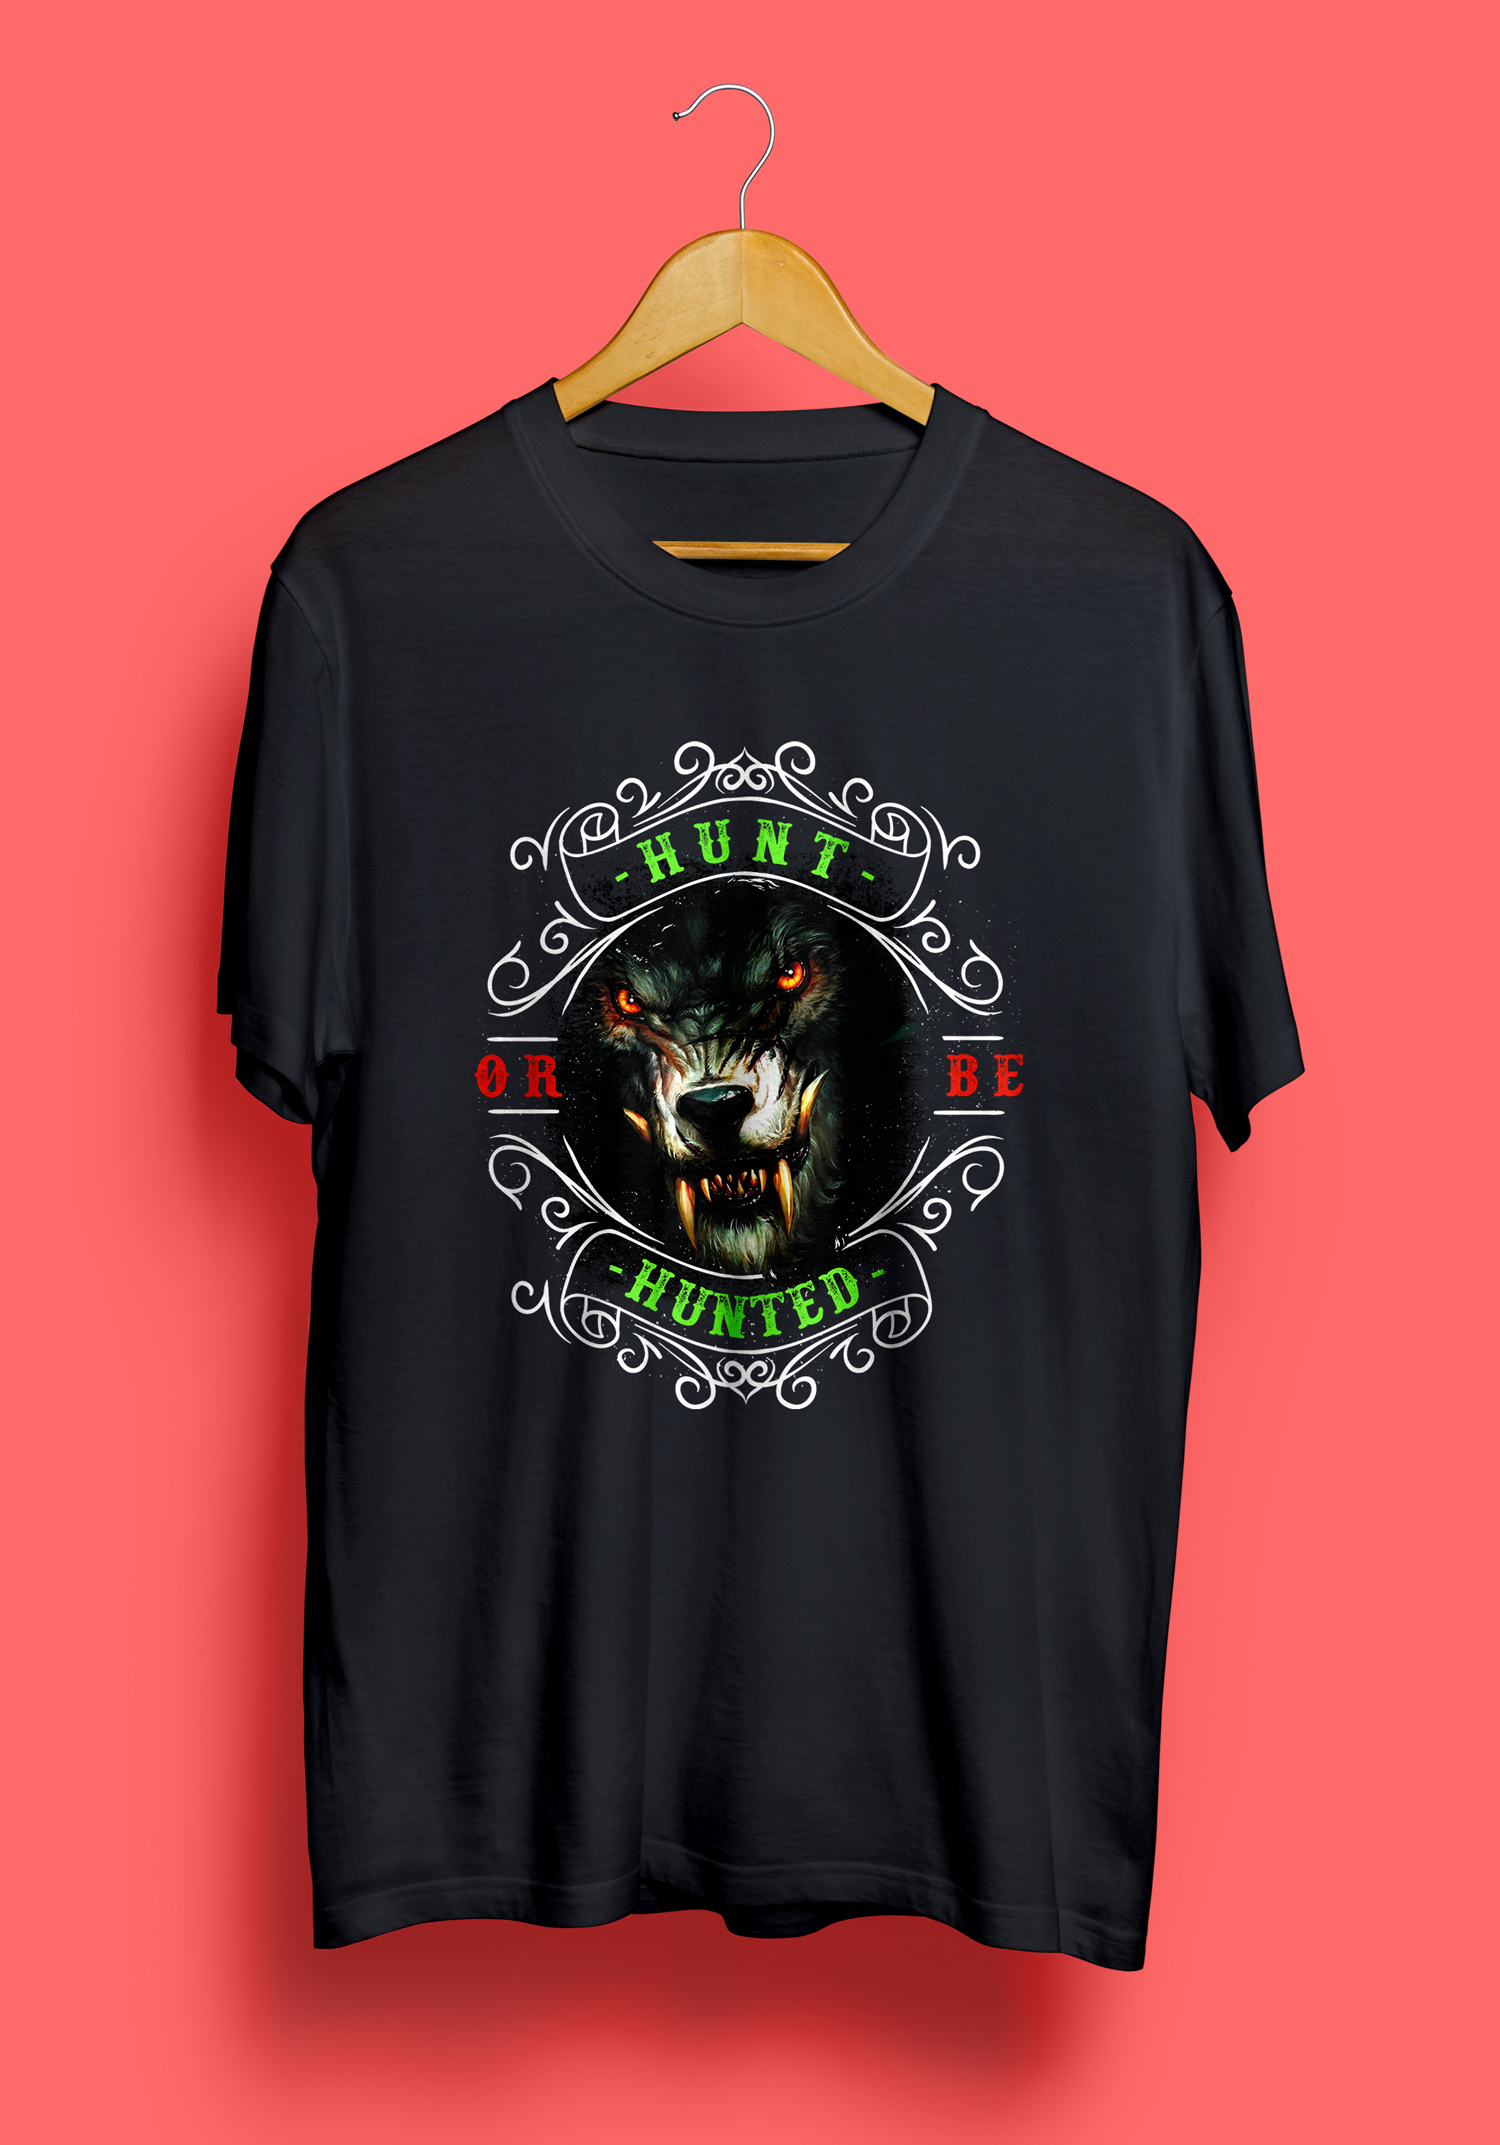 T-Shirt Design for Hunting Niche